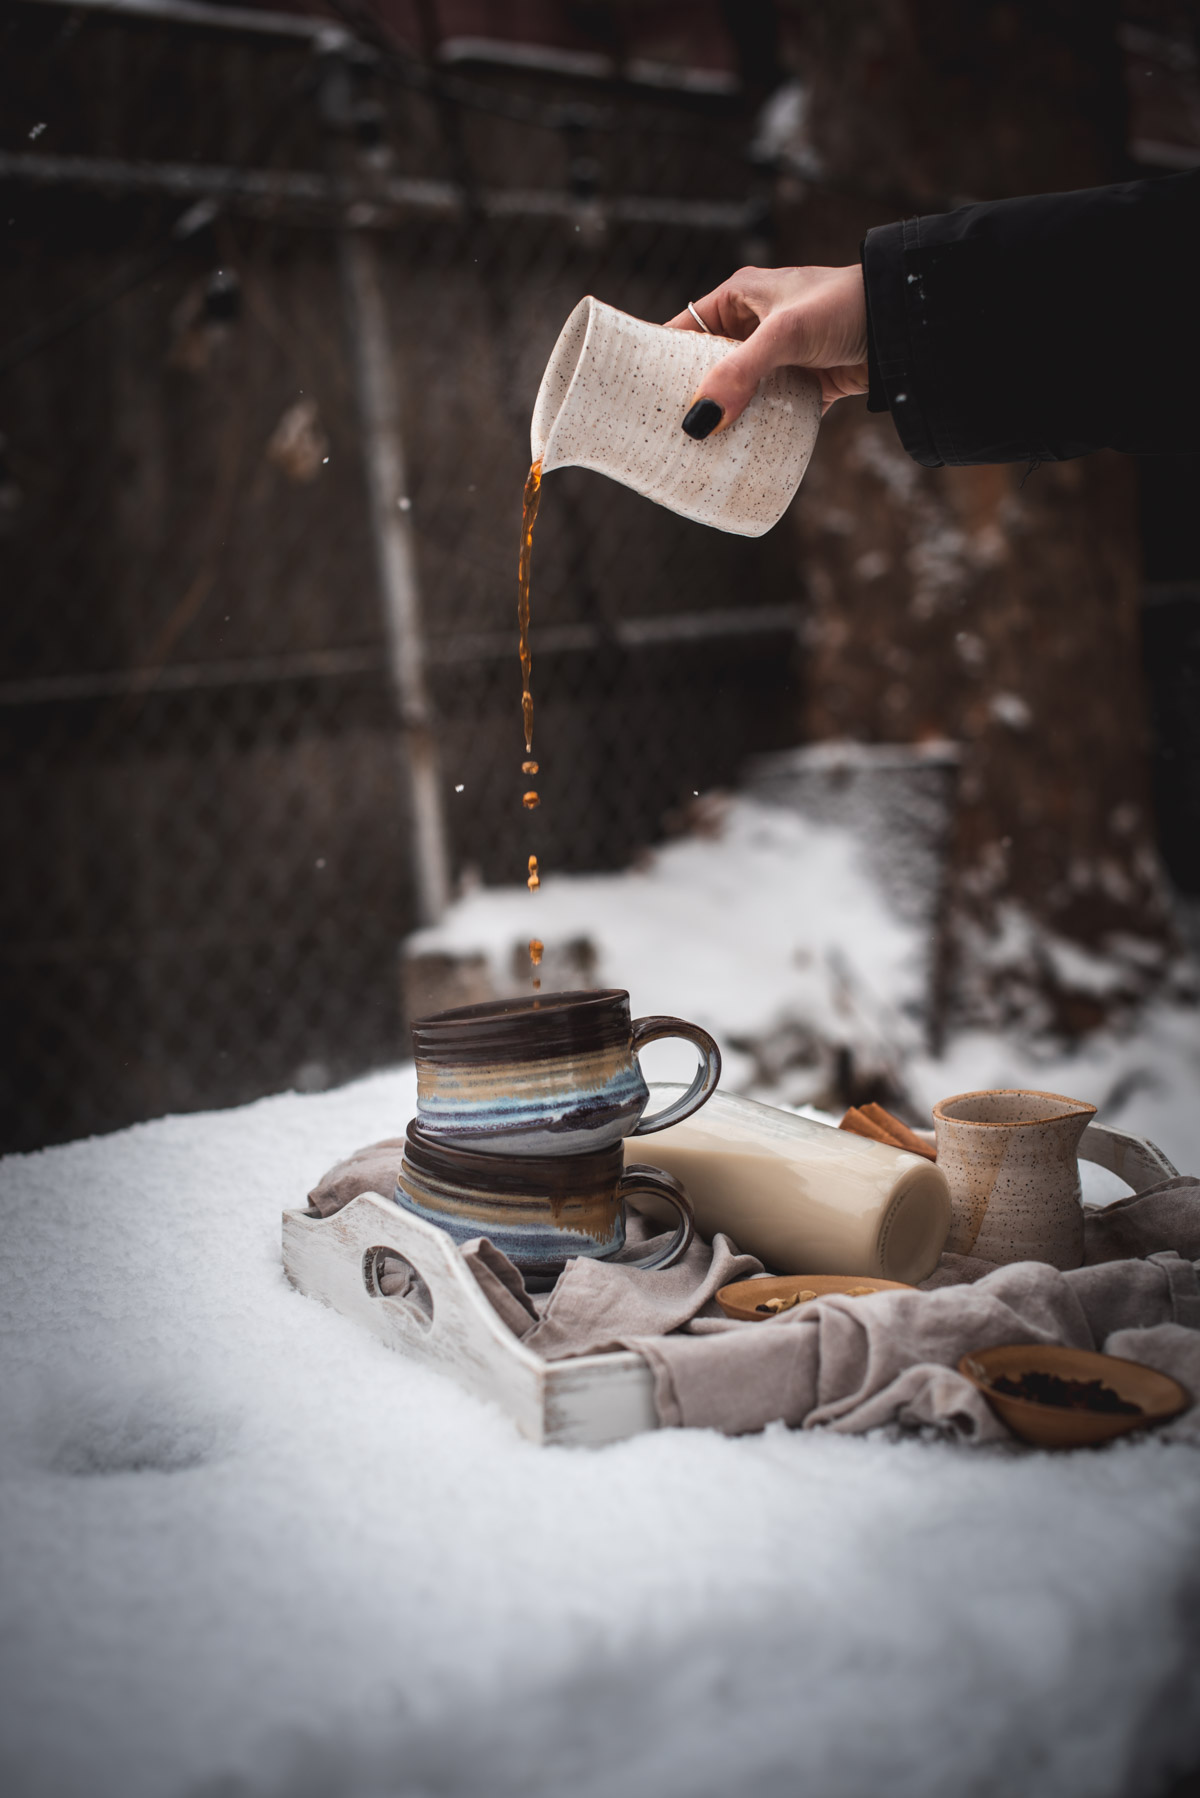 Two ceramic mugs in layered colors of blue, lavender, and brown stacked on top of each other on a white beverage tray.  Chai tea latte syrup is pouring into the top mug from a white ceramic pourer.  The beverage tray is set on a snow covered table.